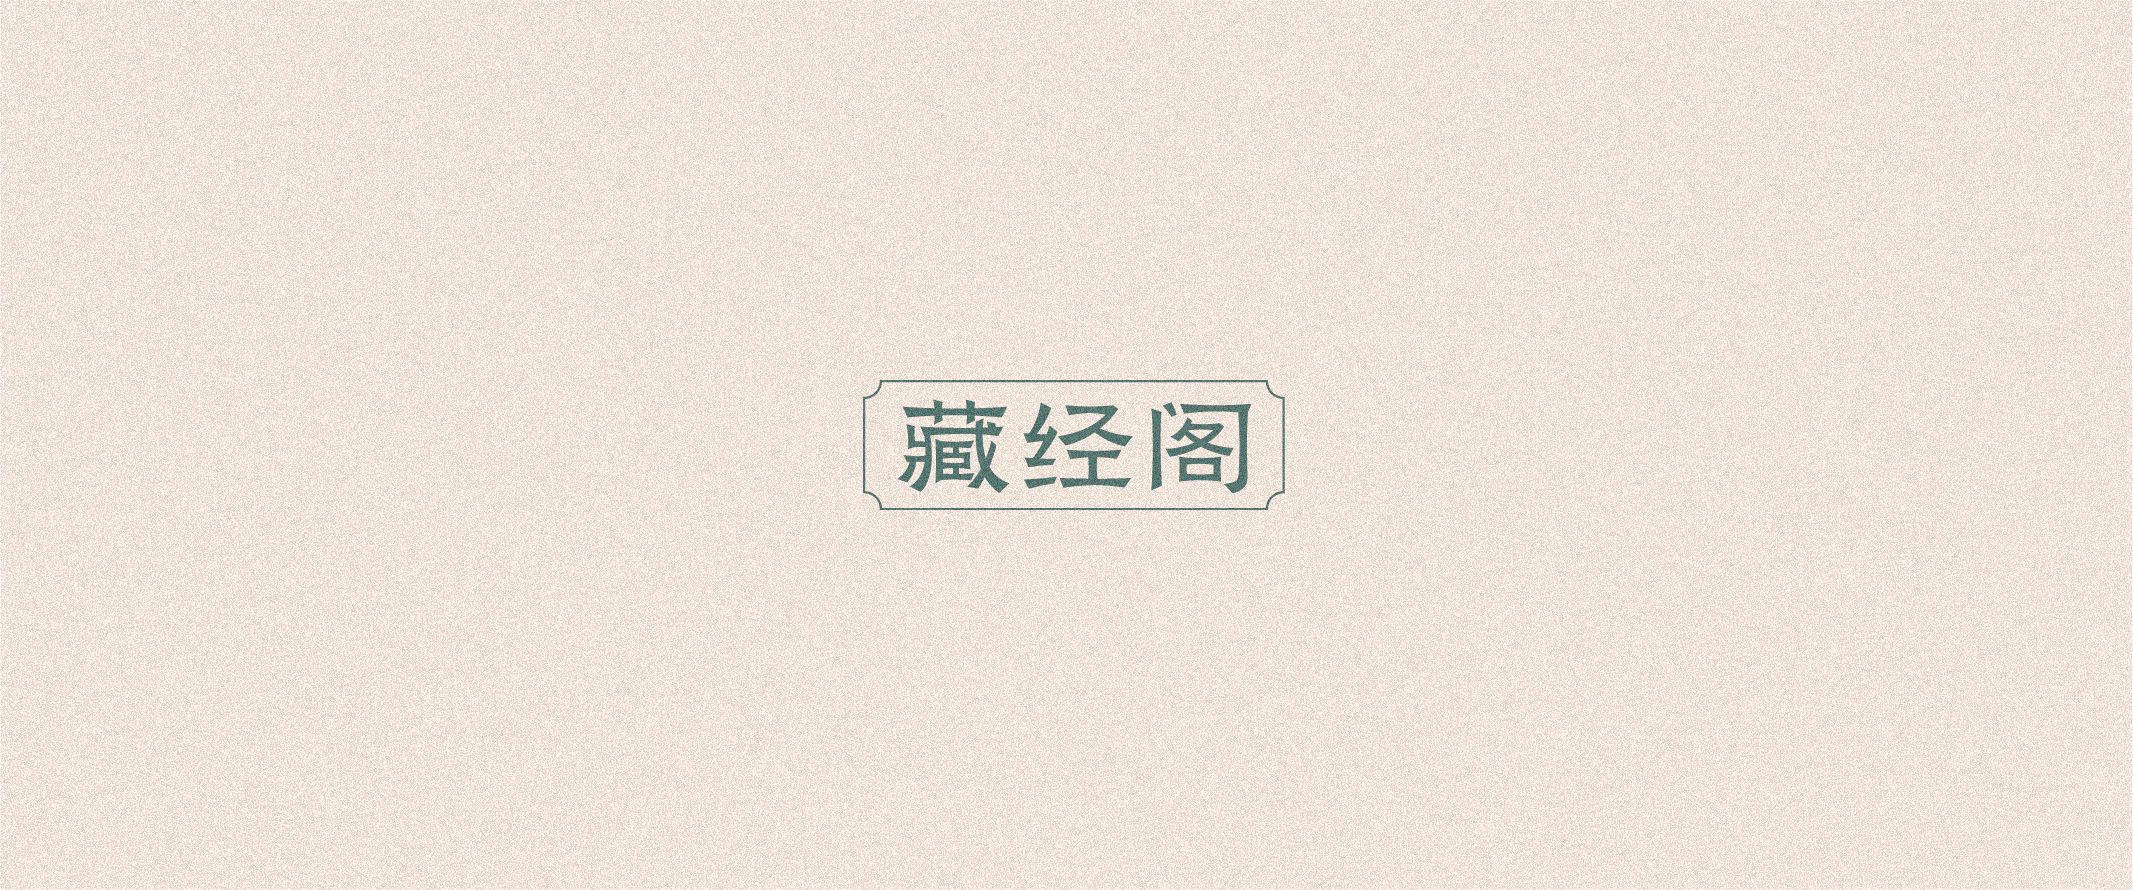 28P Chinese font design collection inspiration #.105